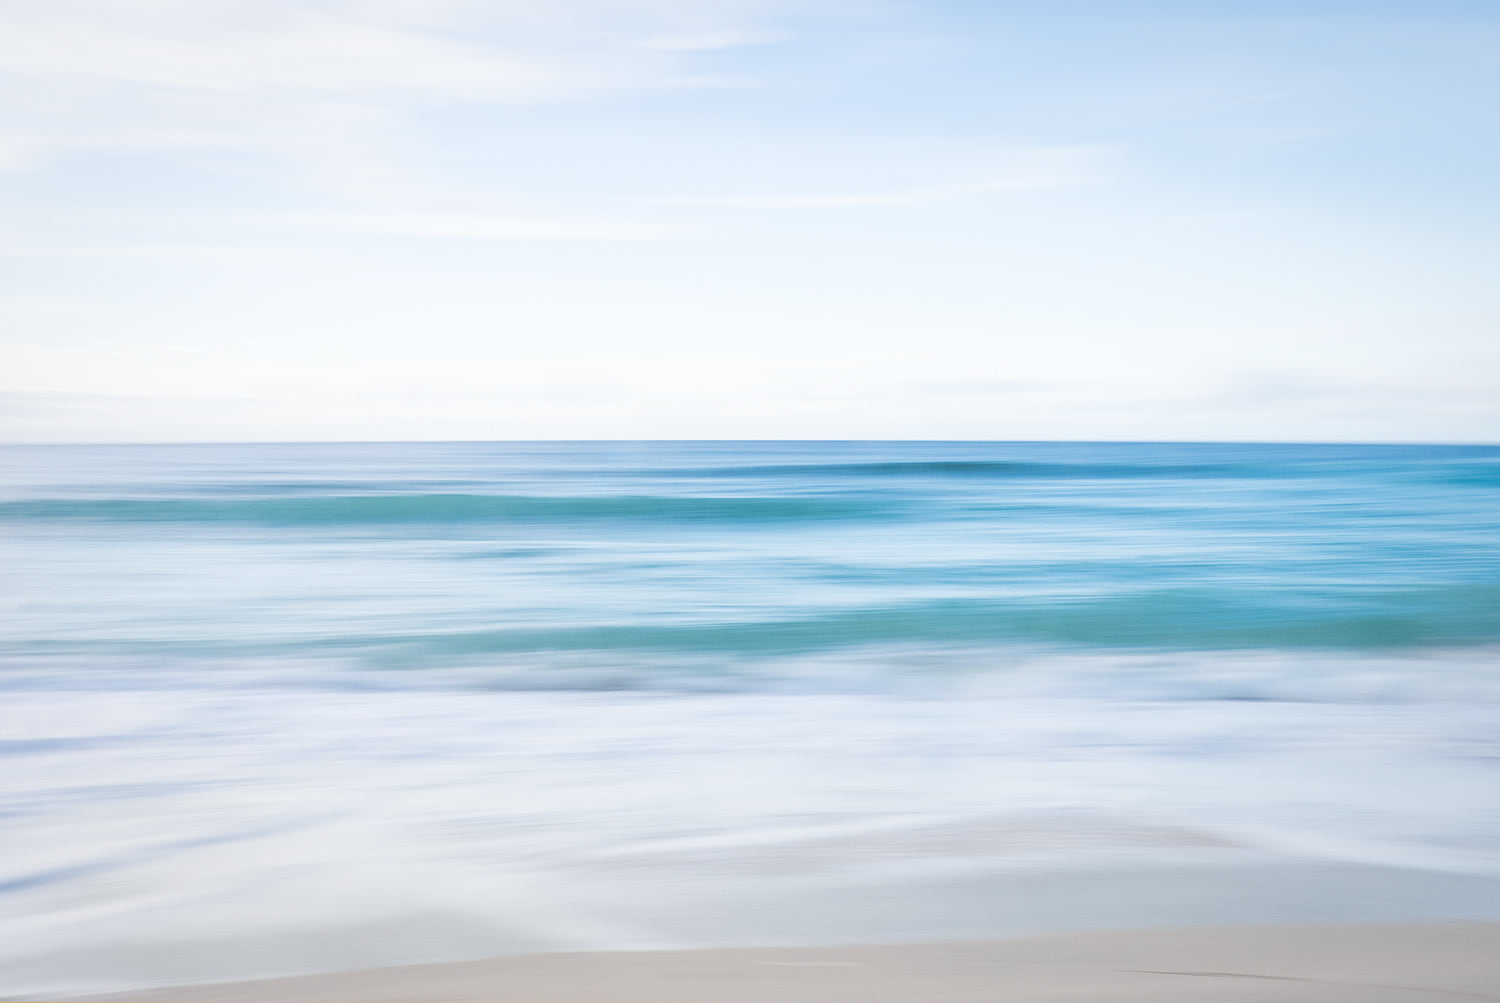 A sea at St Ives, Cornwall on an early evening in September. The waves from the light blue sea gently caress the sandy beach creating a calming effect.